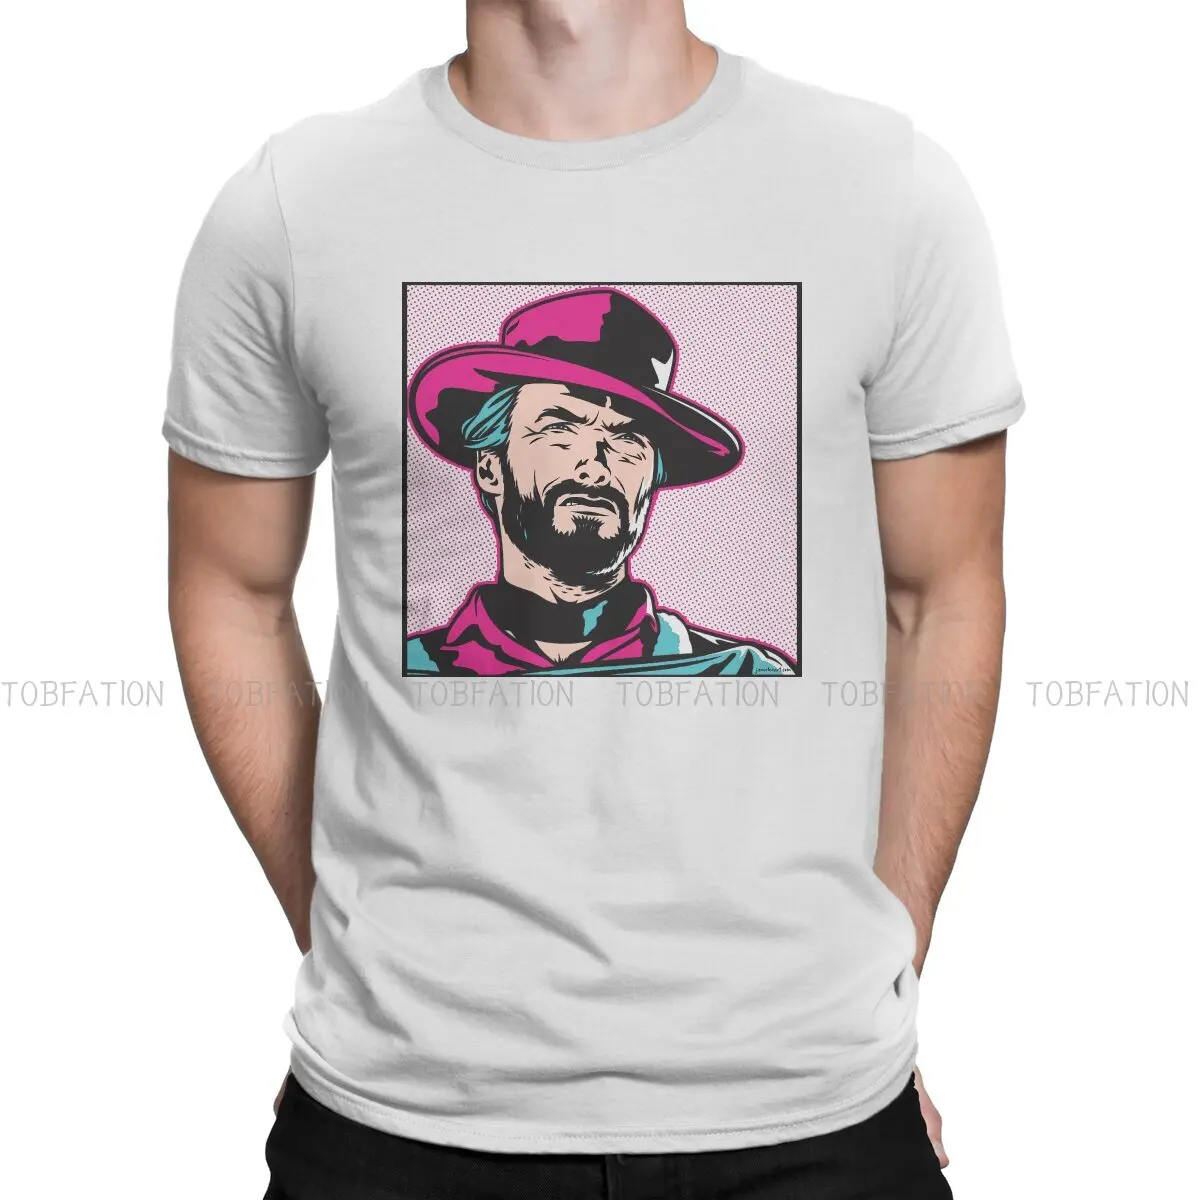 Fitted  Unique TShirt Clint Eastwood A Fistful Of Dollars Cowboy Comfortable Hip Hop Graphic  T Shirt Stuff Hot Sale